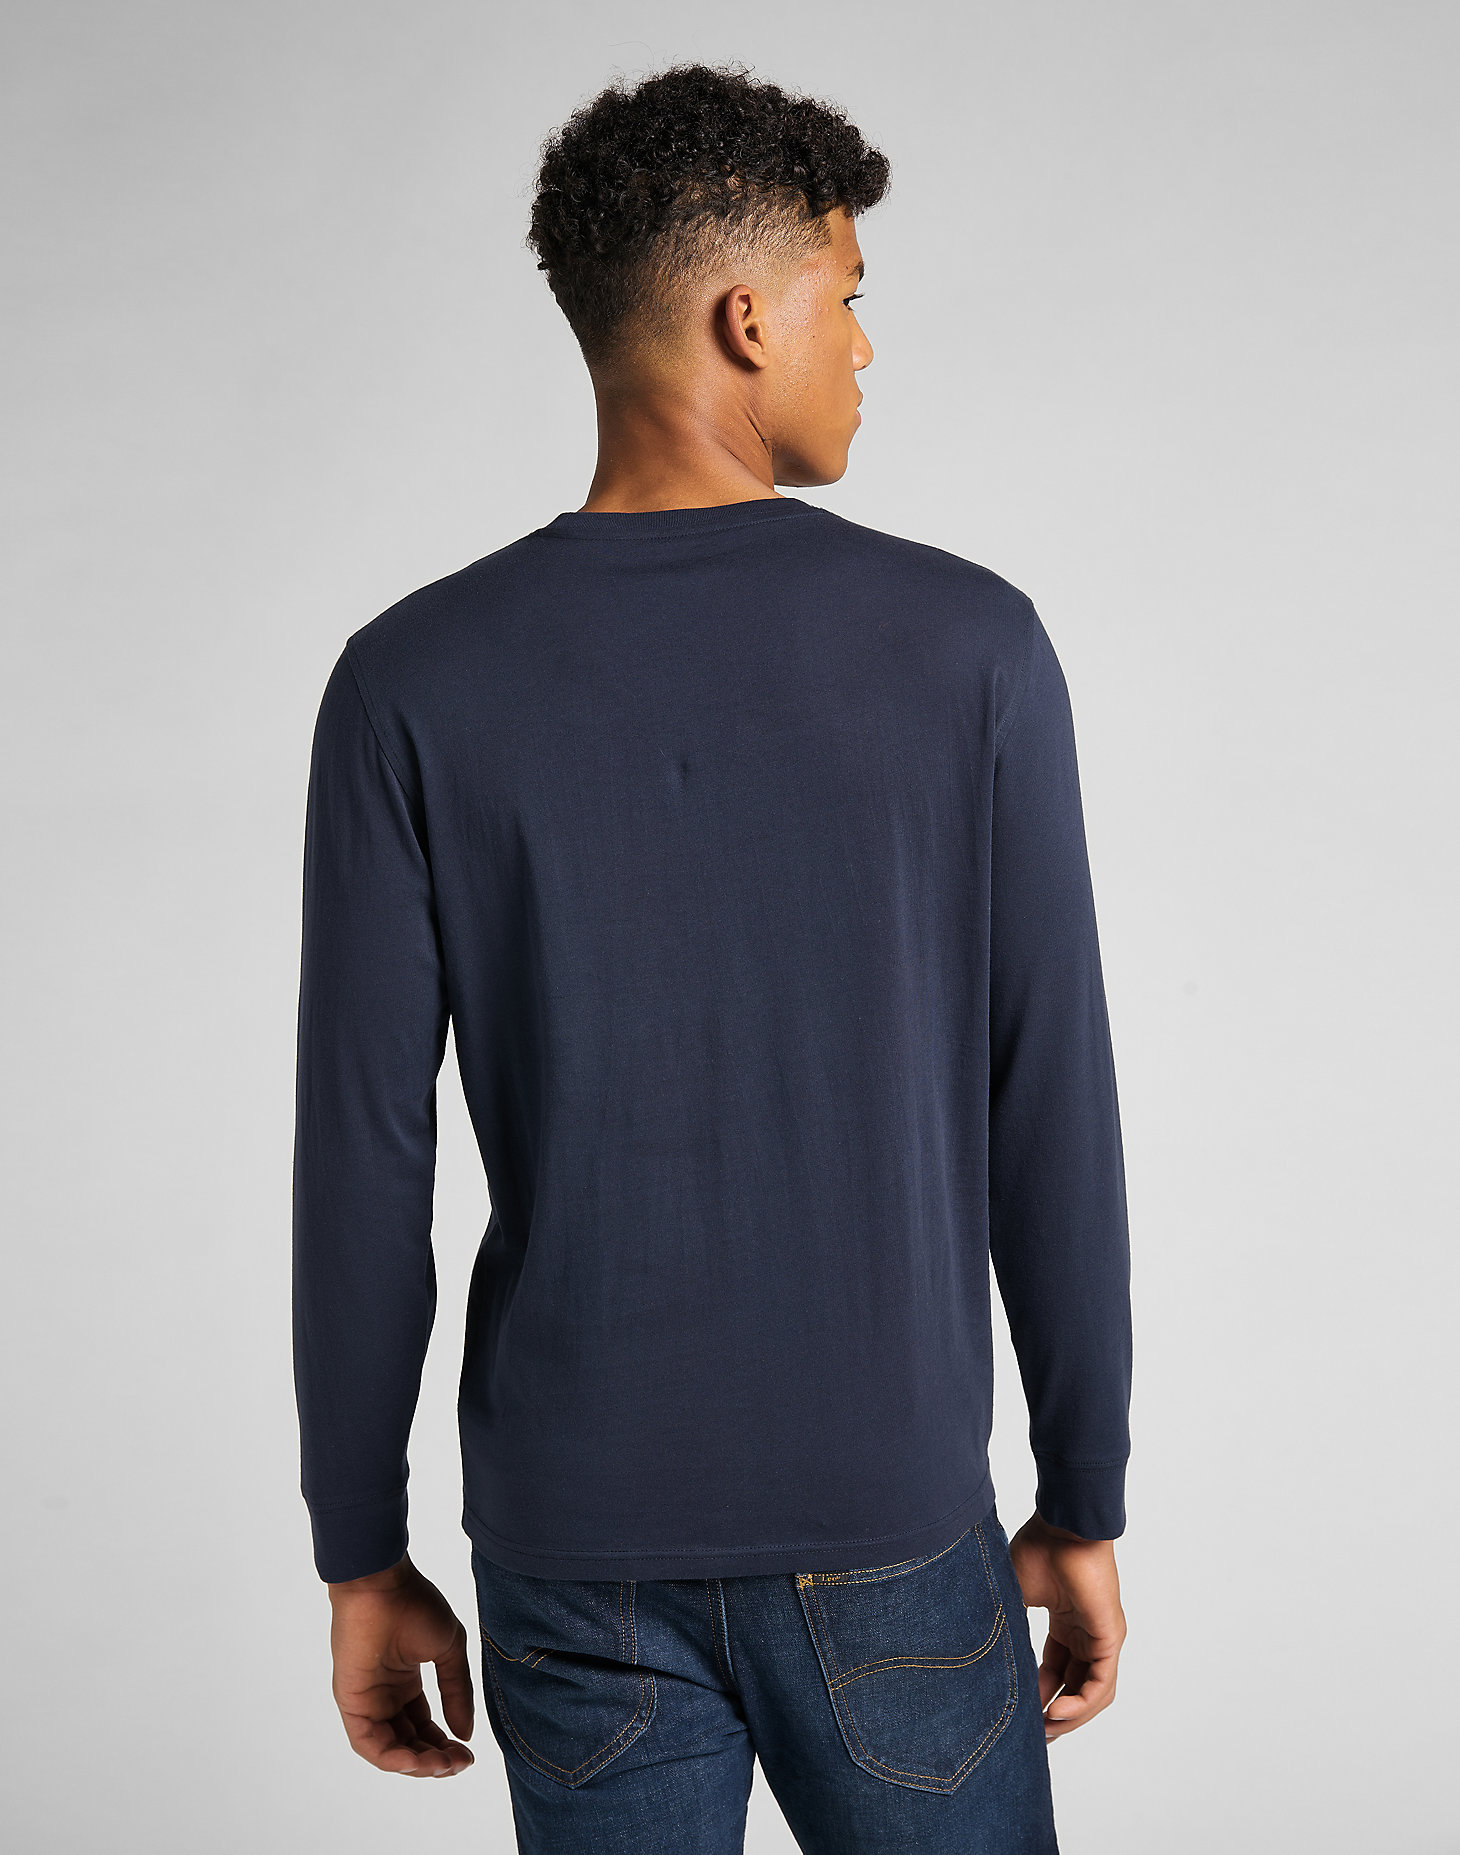 Long Sleeve Patch Logo Tee in Navy alternative view 1